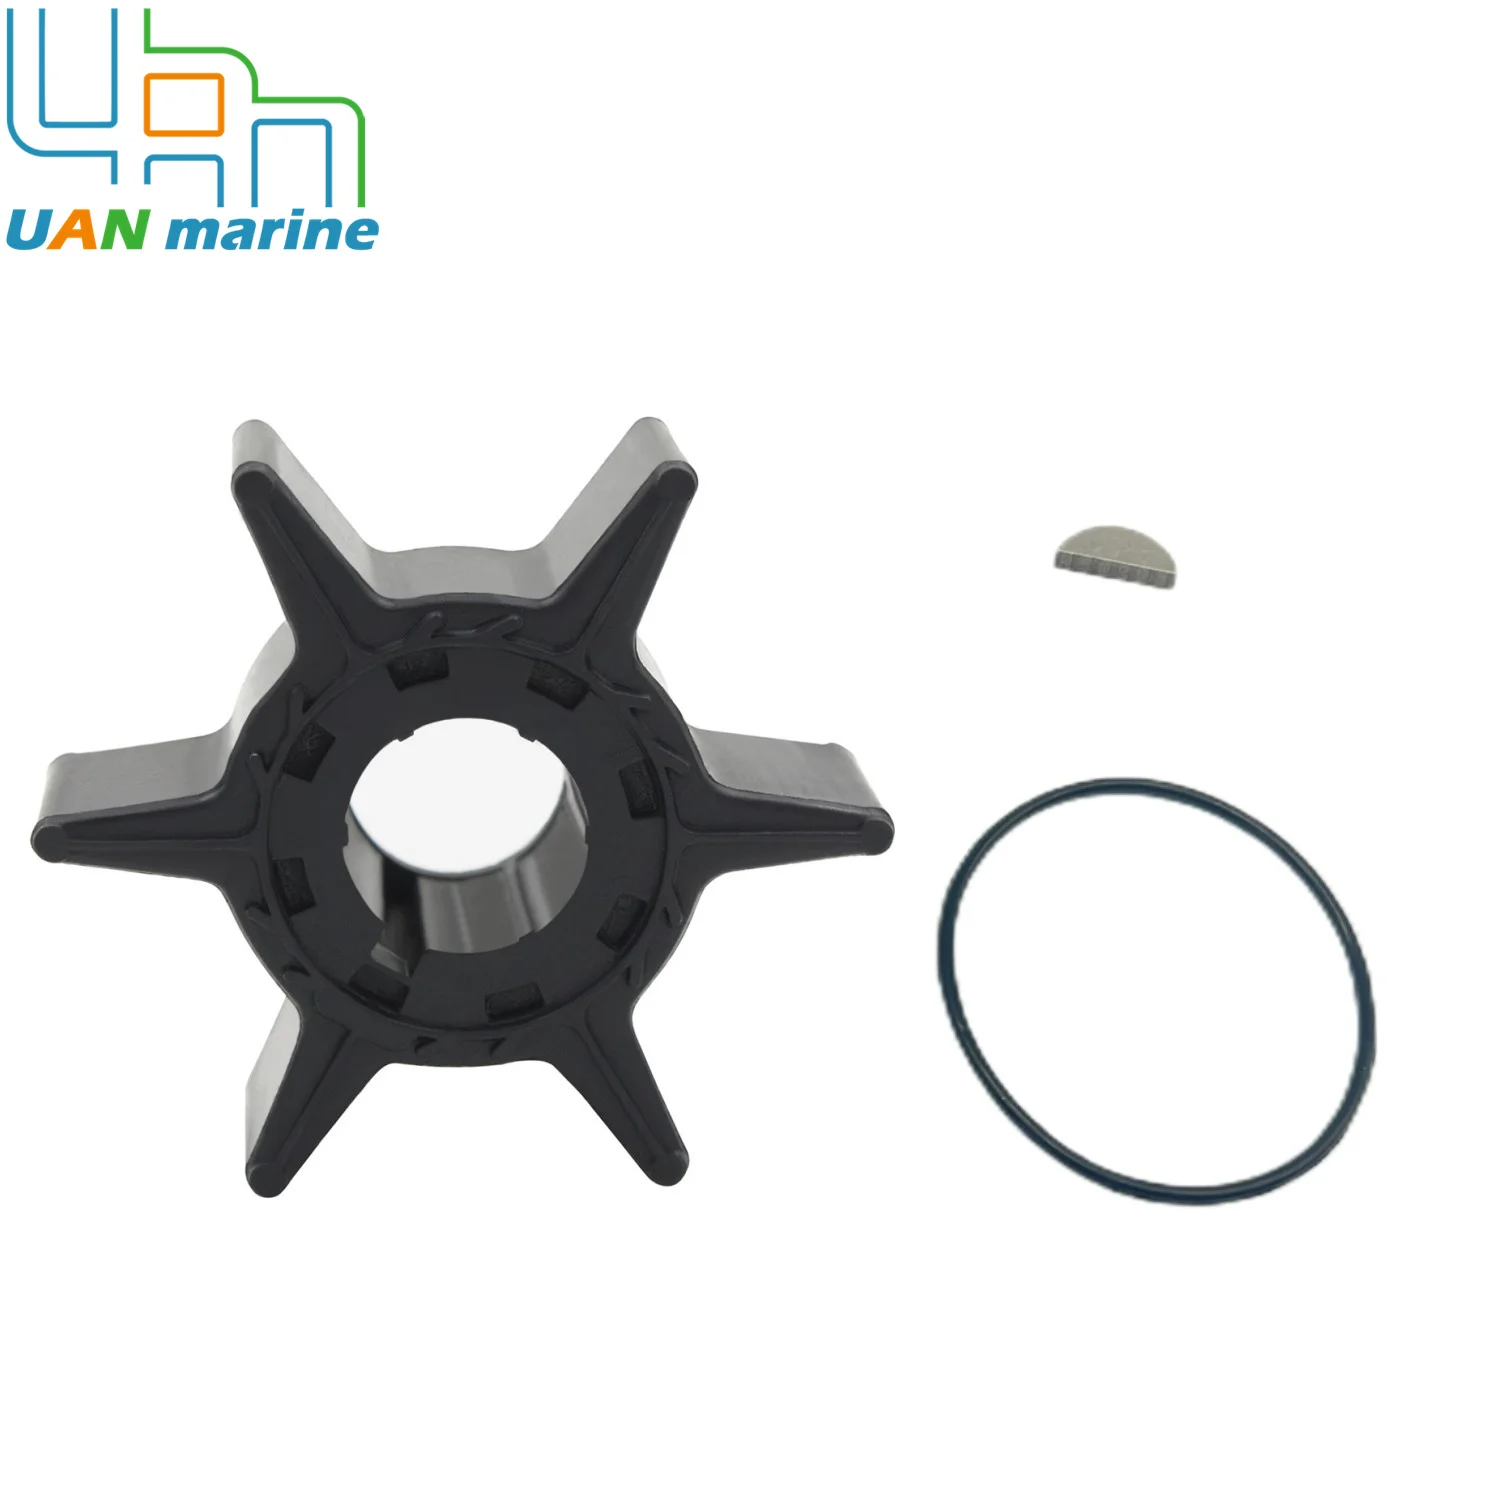 

6L2-44352 Water Pump Impeller Kits with Key For Yamaha 2 Stroke 4 Stroke 20 25 HP Outboard 6L2-44352-00 682-44352-01 18-3065